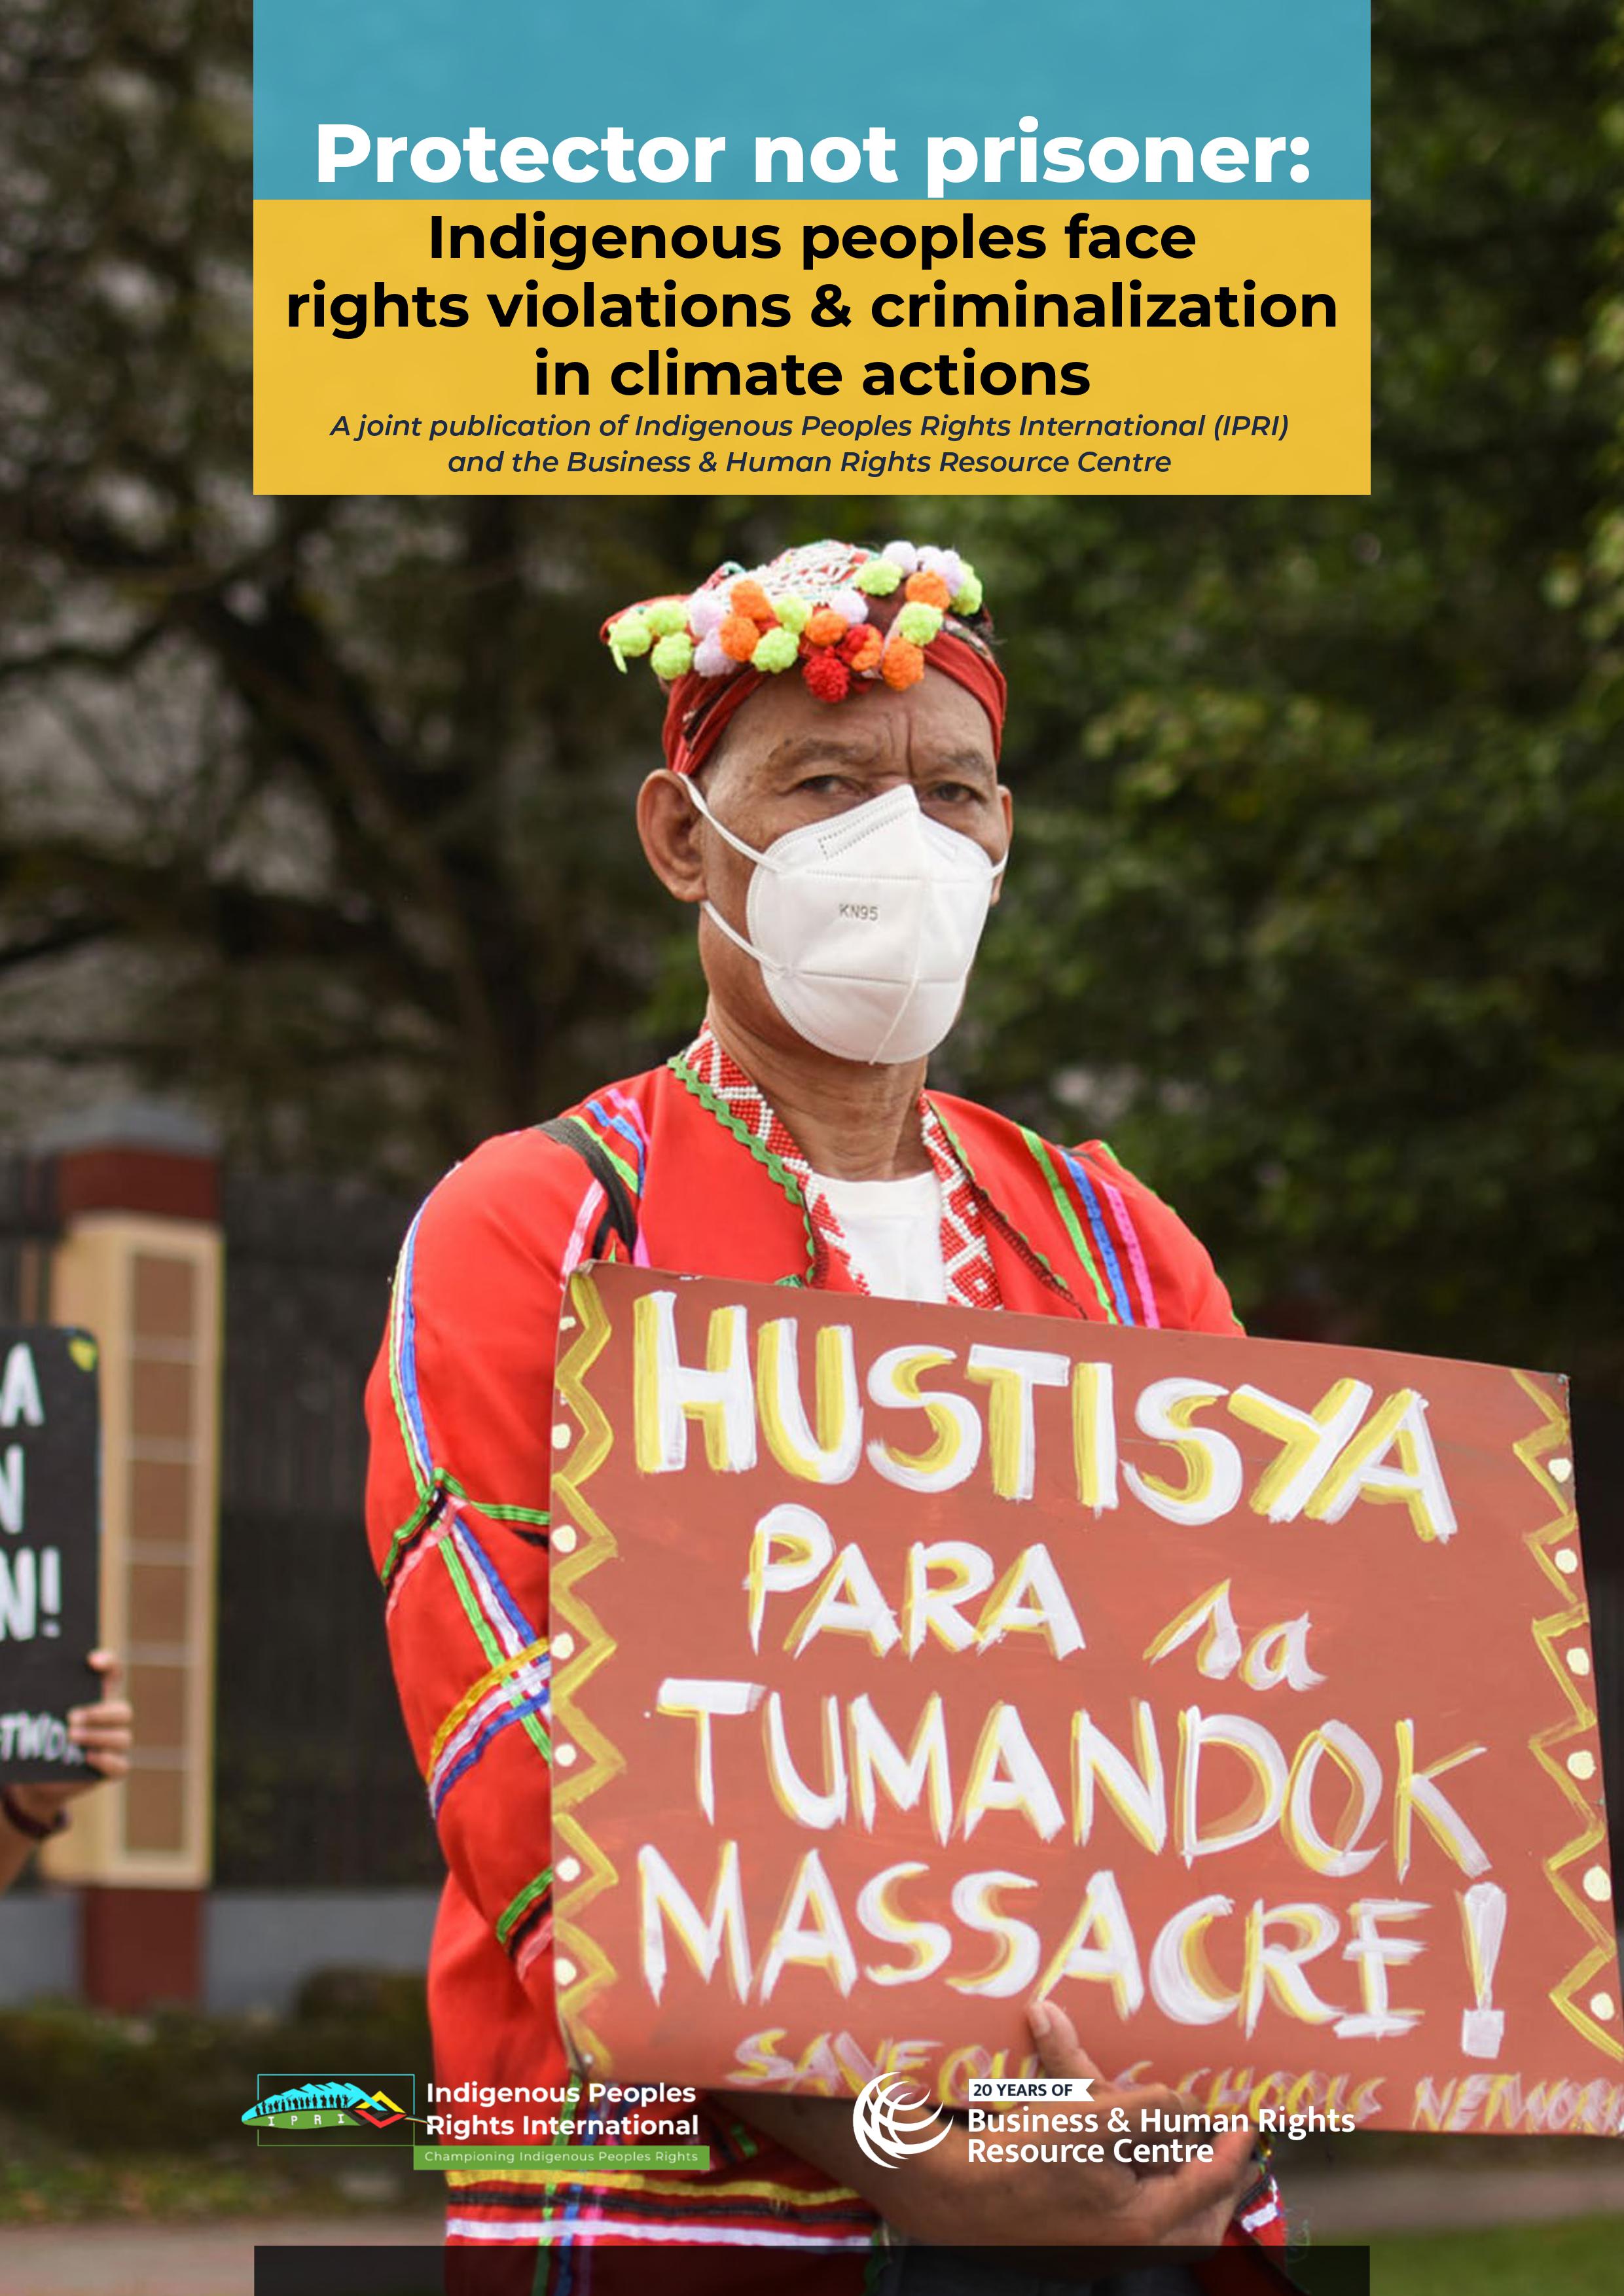 Protector not prisoner: Indigenous peoples face rights violations & criminalization in climate actions